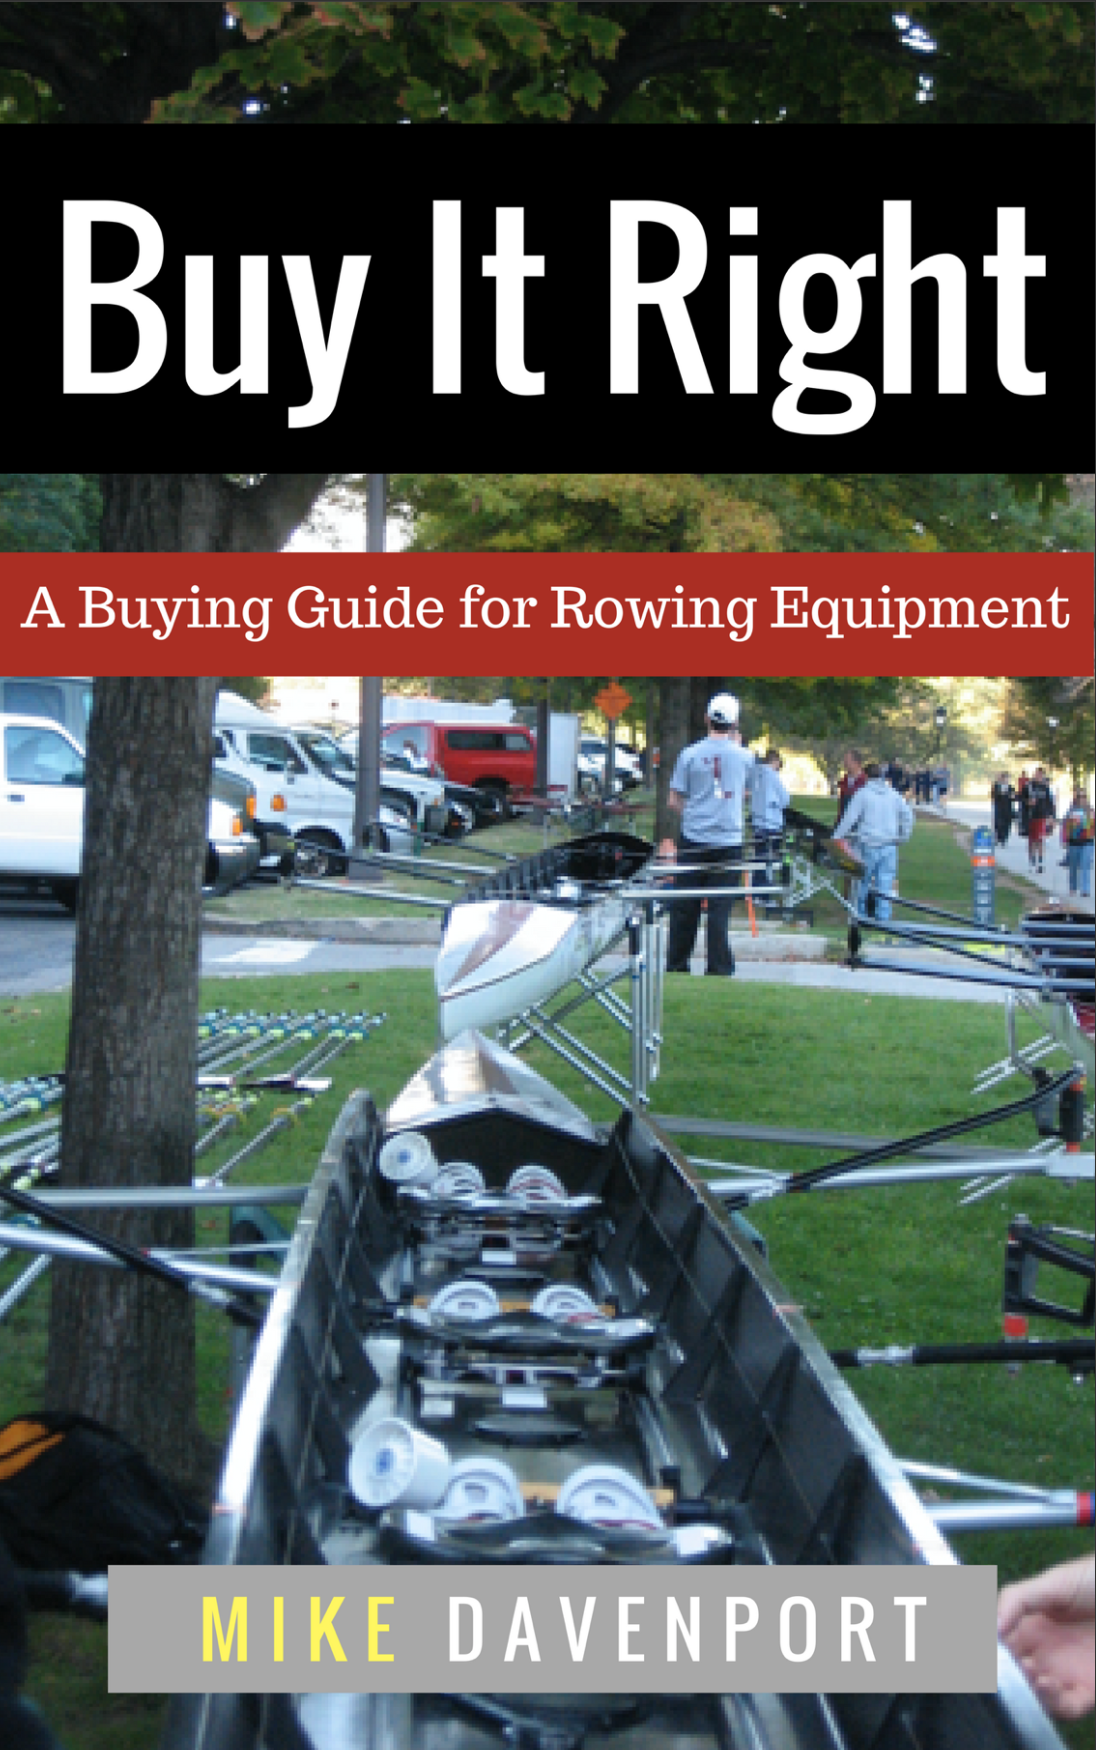 buy it right, rowing equipment purchase, mike davenport, rowing advice, 